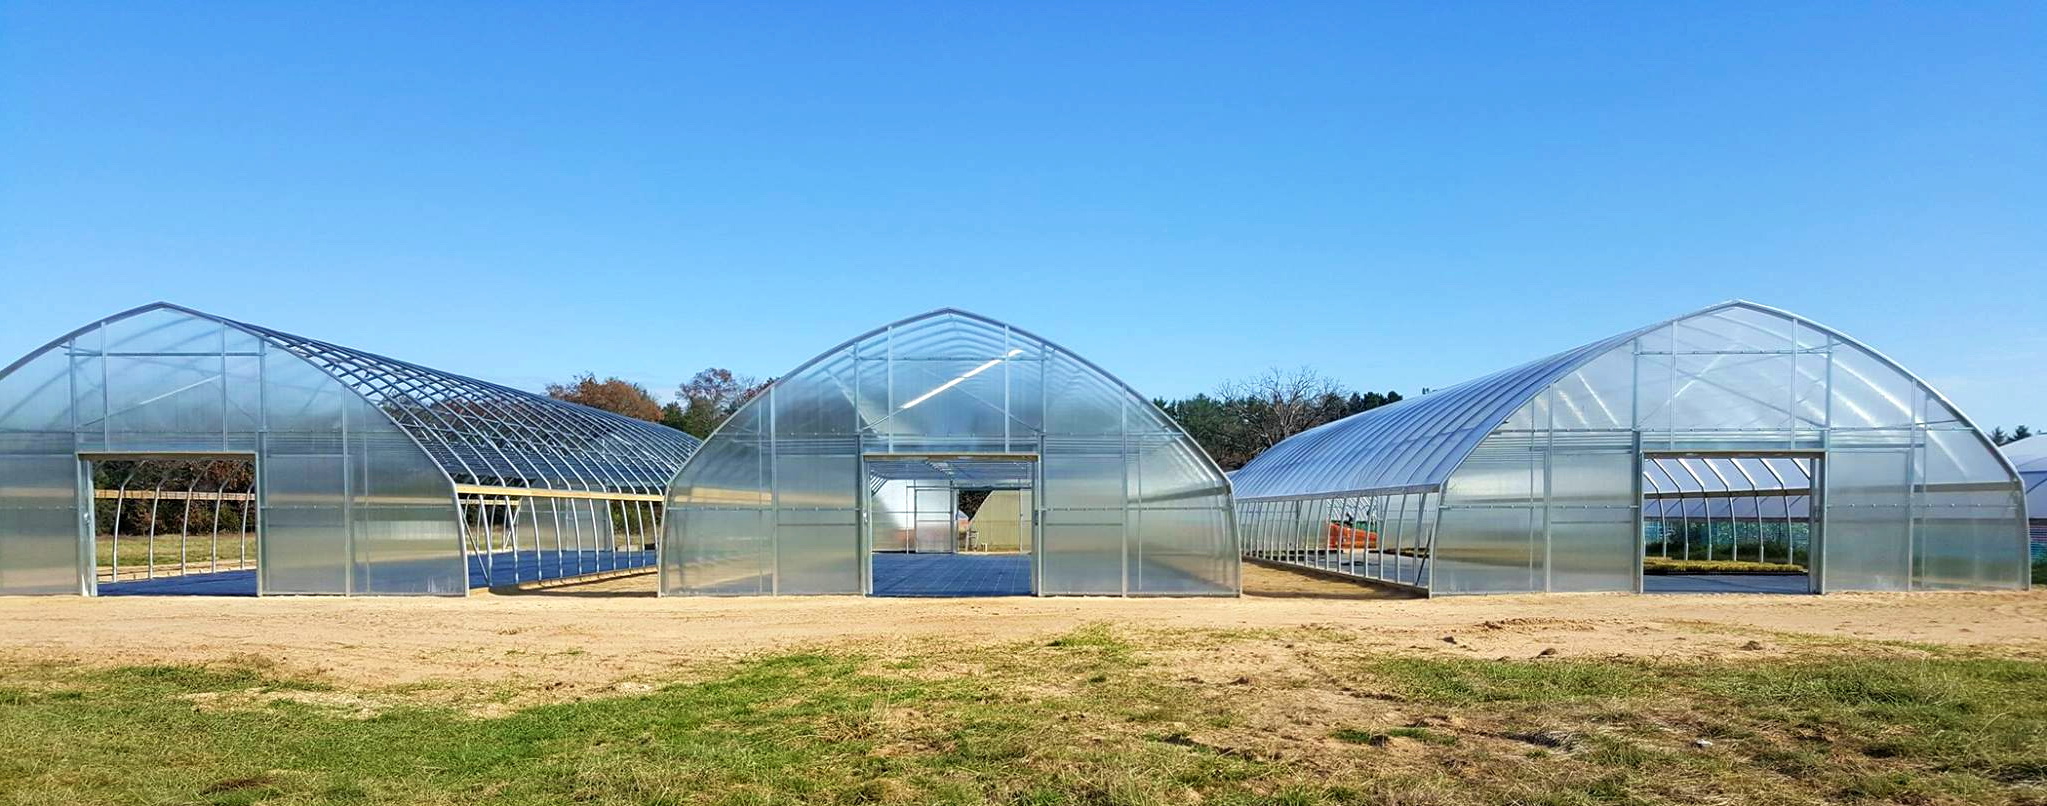 Prairie Nursery Grows Important Native Plants in its ATI Greenhouses | Commercial Greerhouse Manufacturer